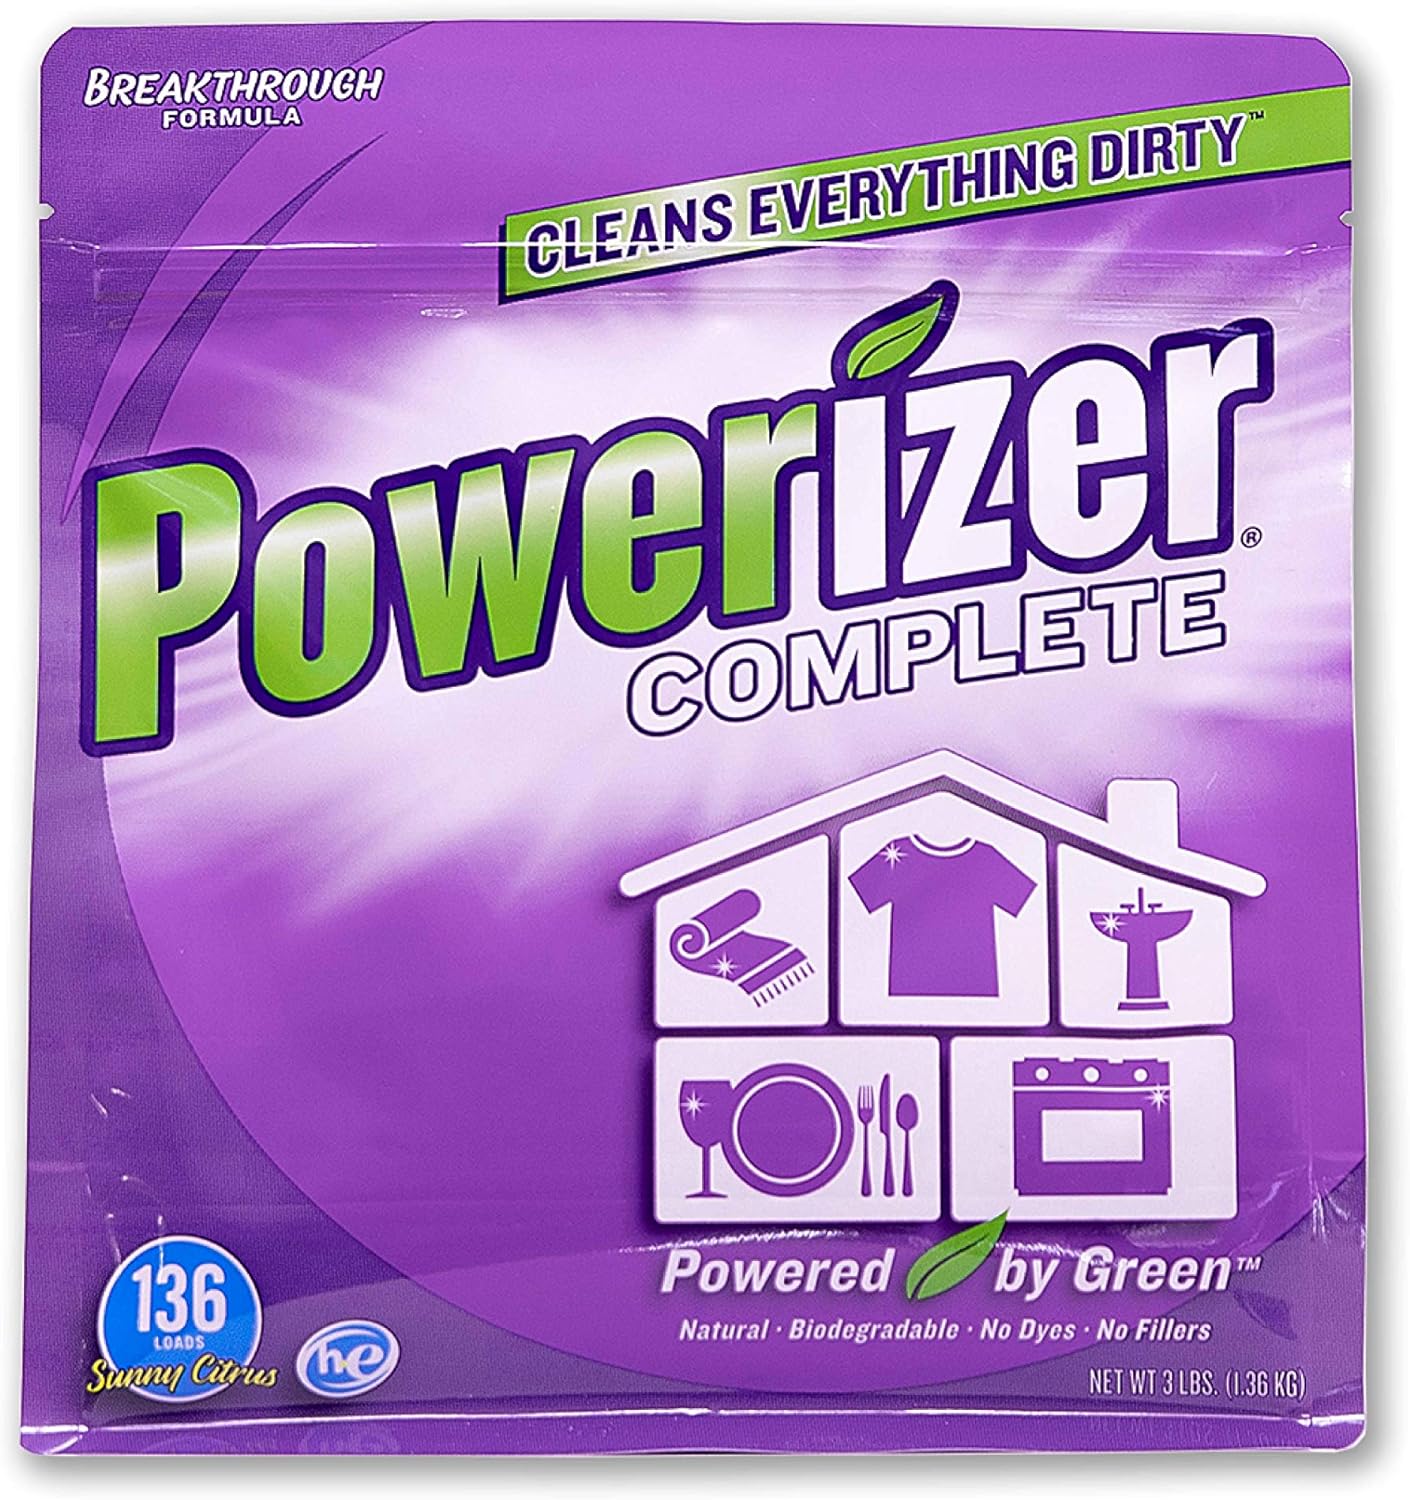 Powerizer Complete Laundry Powder Detergent & Multipurpose Cleaner | 3 lb Detergent Powder | 136 Scoops | Plant-Based Concentrated Laundry Soap & Dishwasher Detergent Powder